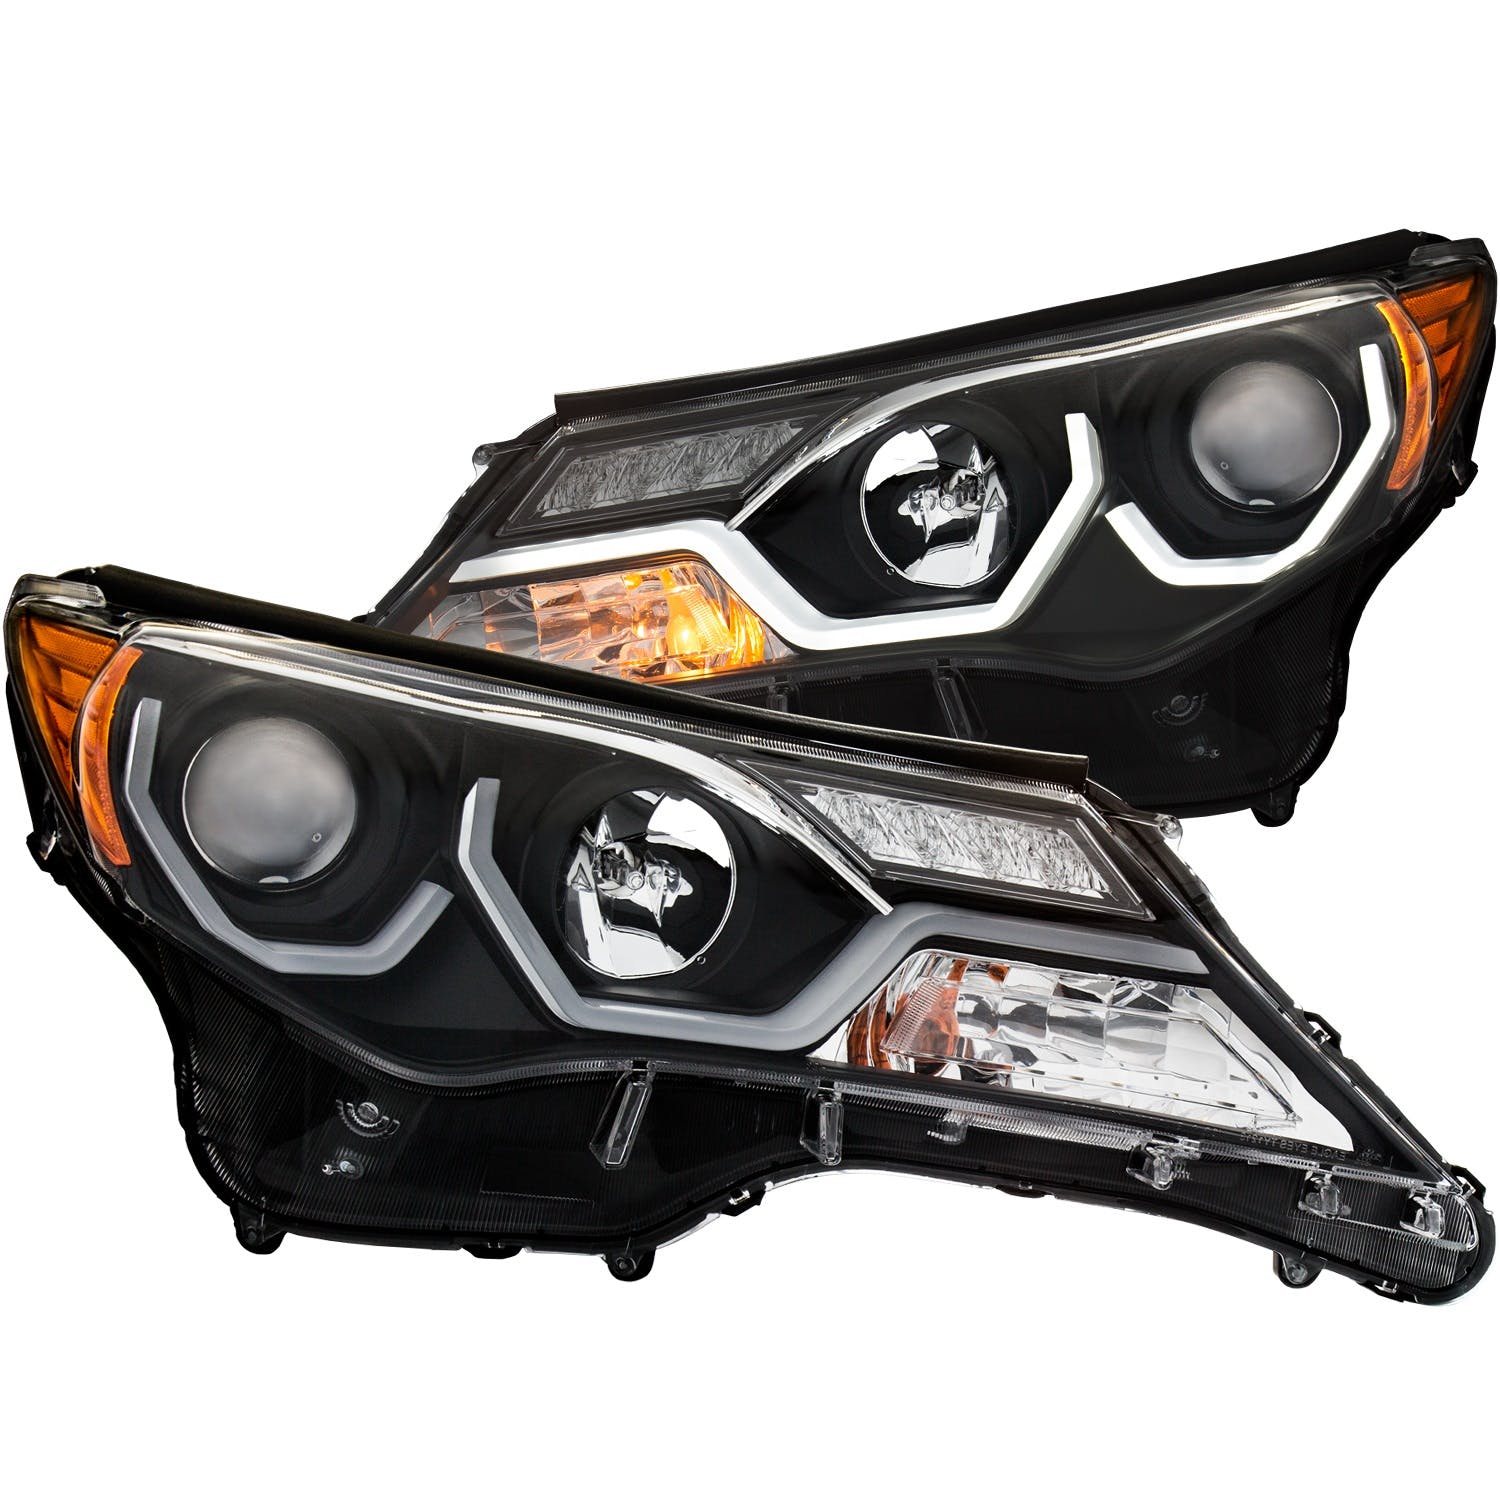 AnzoUSA 111332 Projector Headlights with Plank Style Design Black